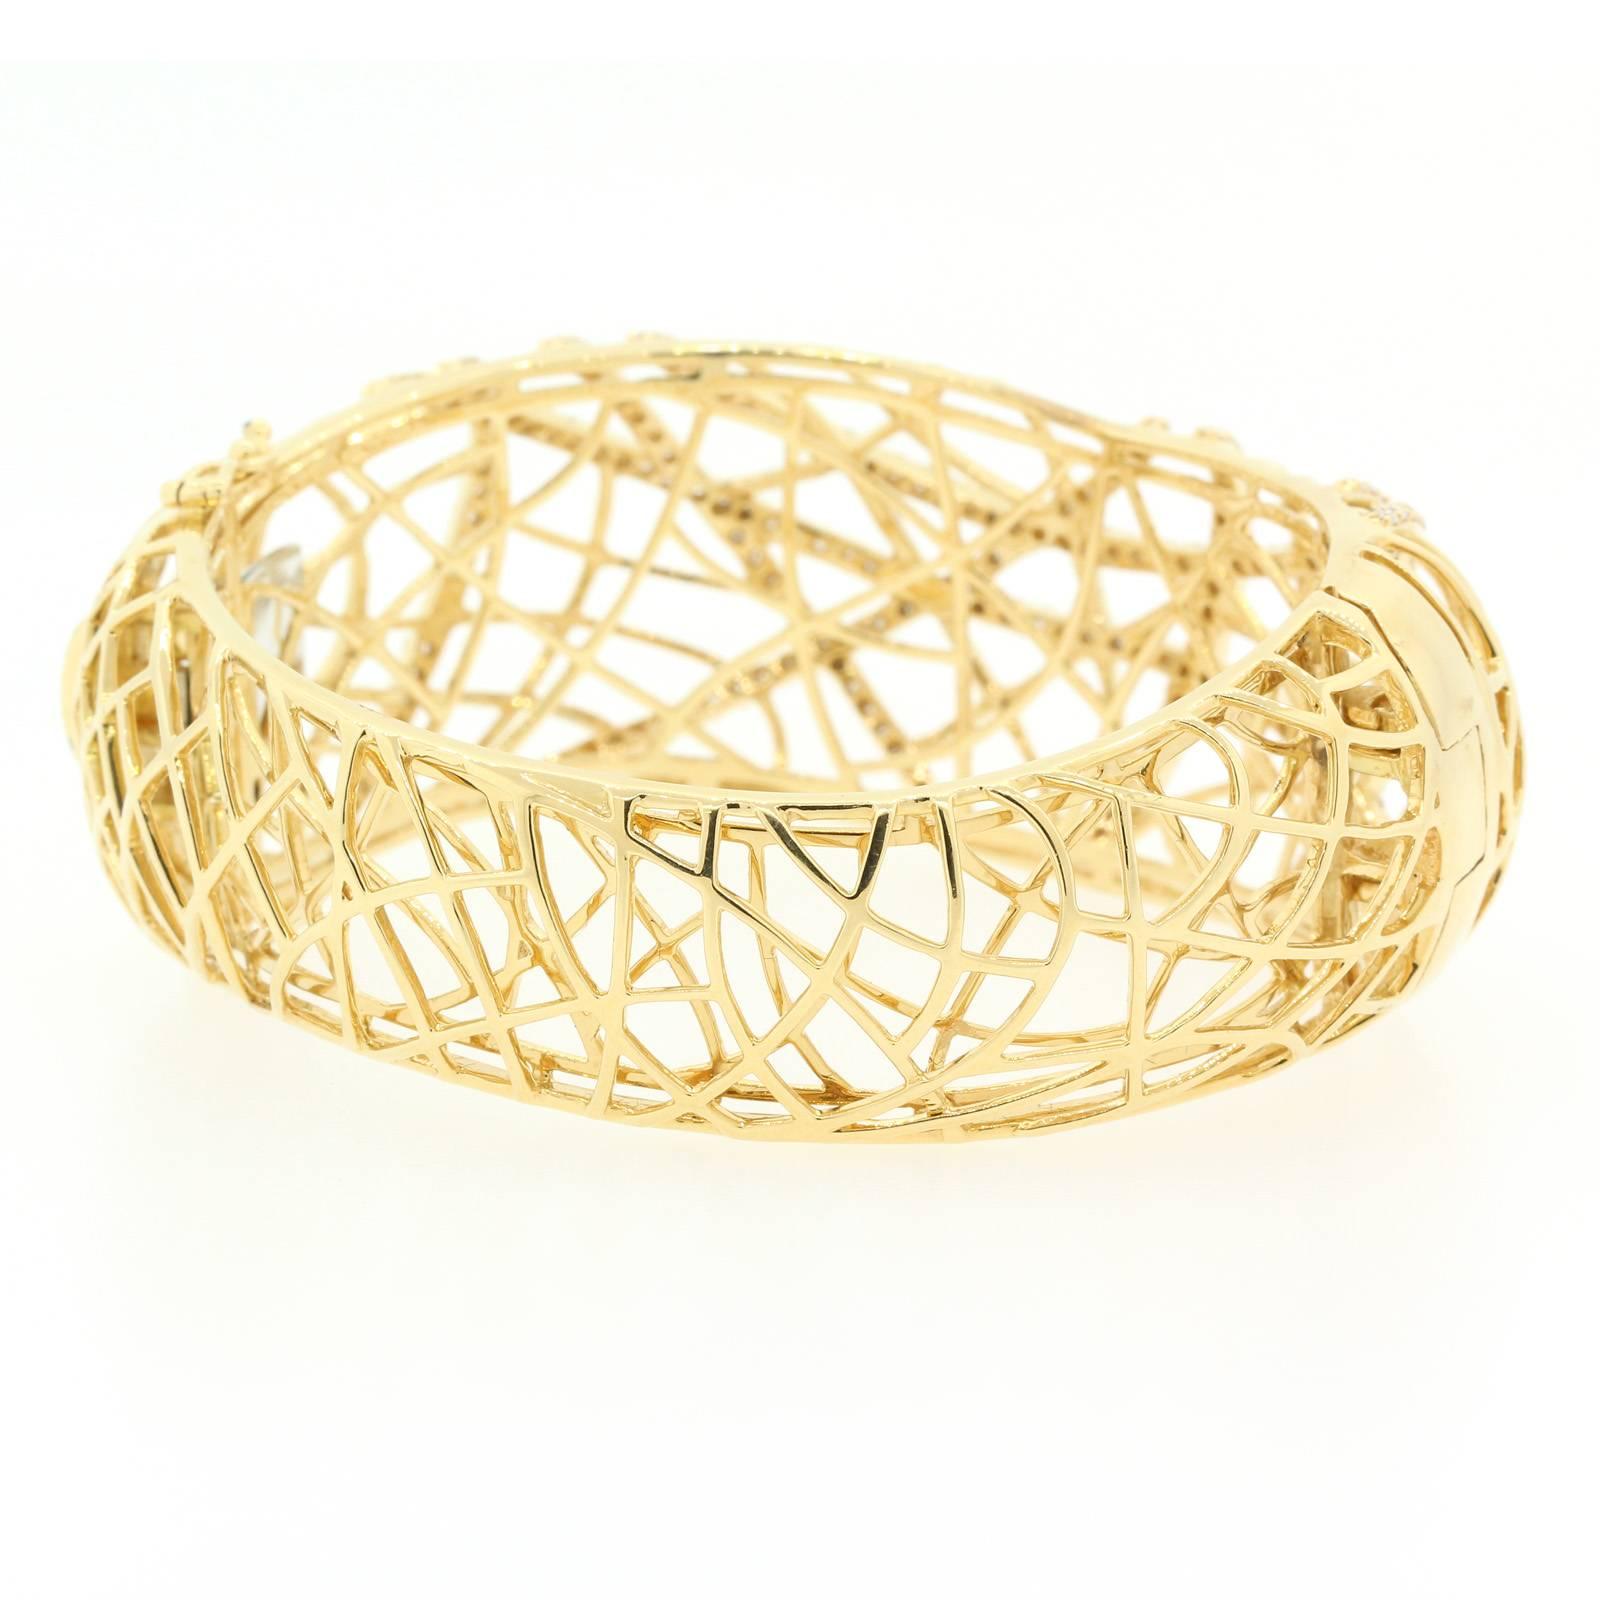 A beautifully designed free form open work bangle-bracelet fabricated in 18KT yellow gold.  The top  is accented with three carats of sparkly Round Brilliant Cut Diamonds, set in five swooping lines.  Circa 1990s. 